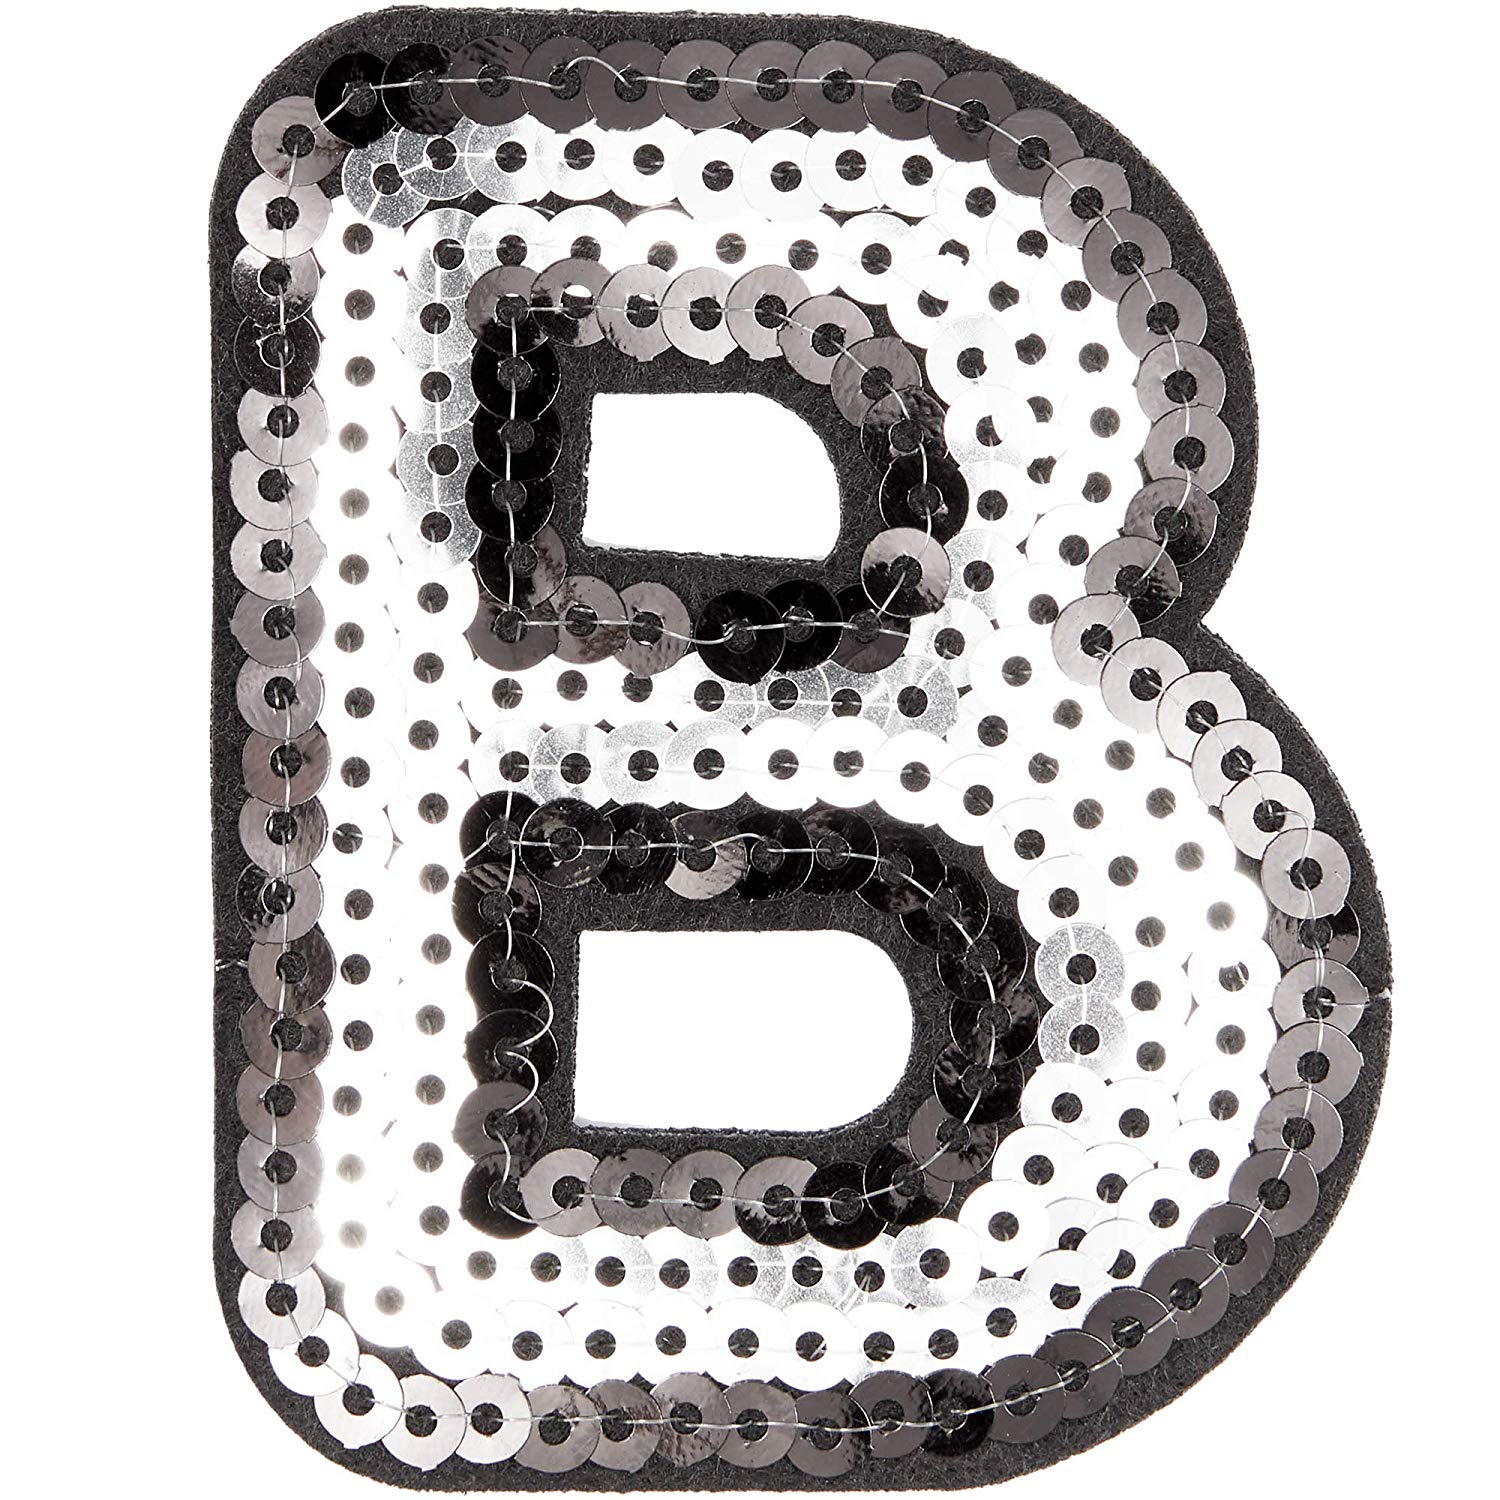 A-Z Letter Rhinestone Patch Iron-on Patches Garment Applique Clothing  Stickers